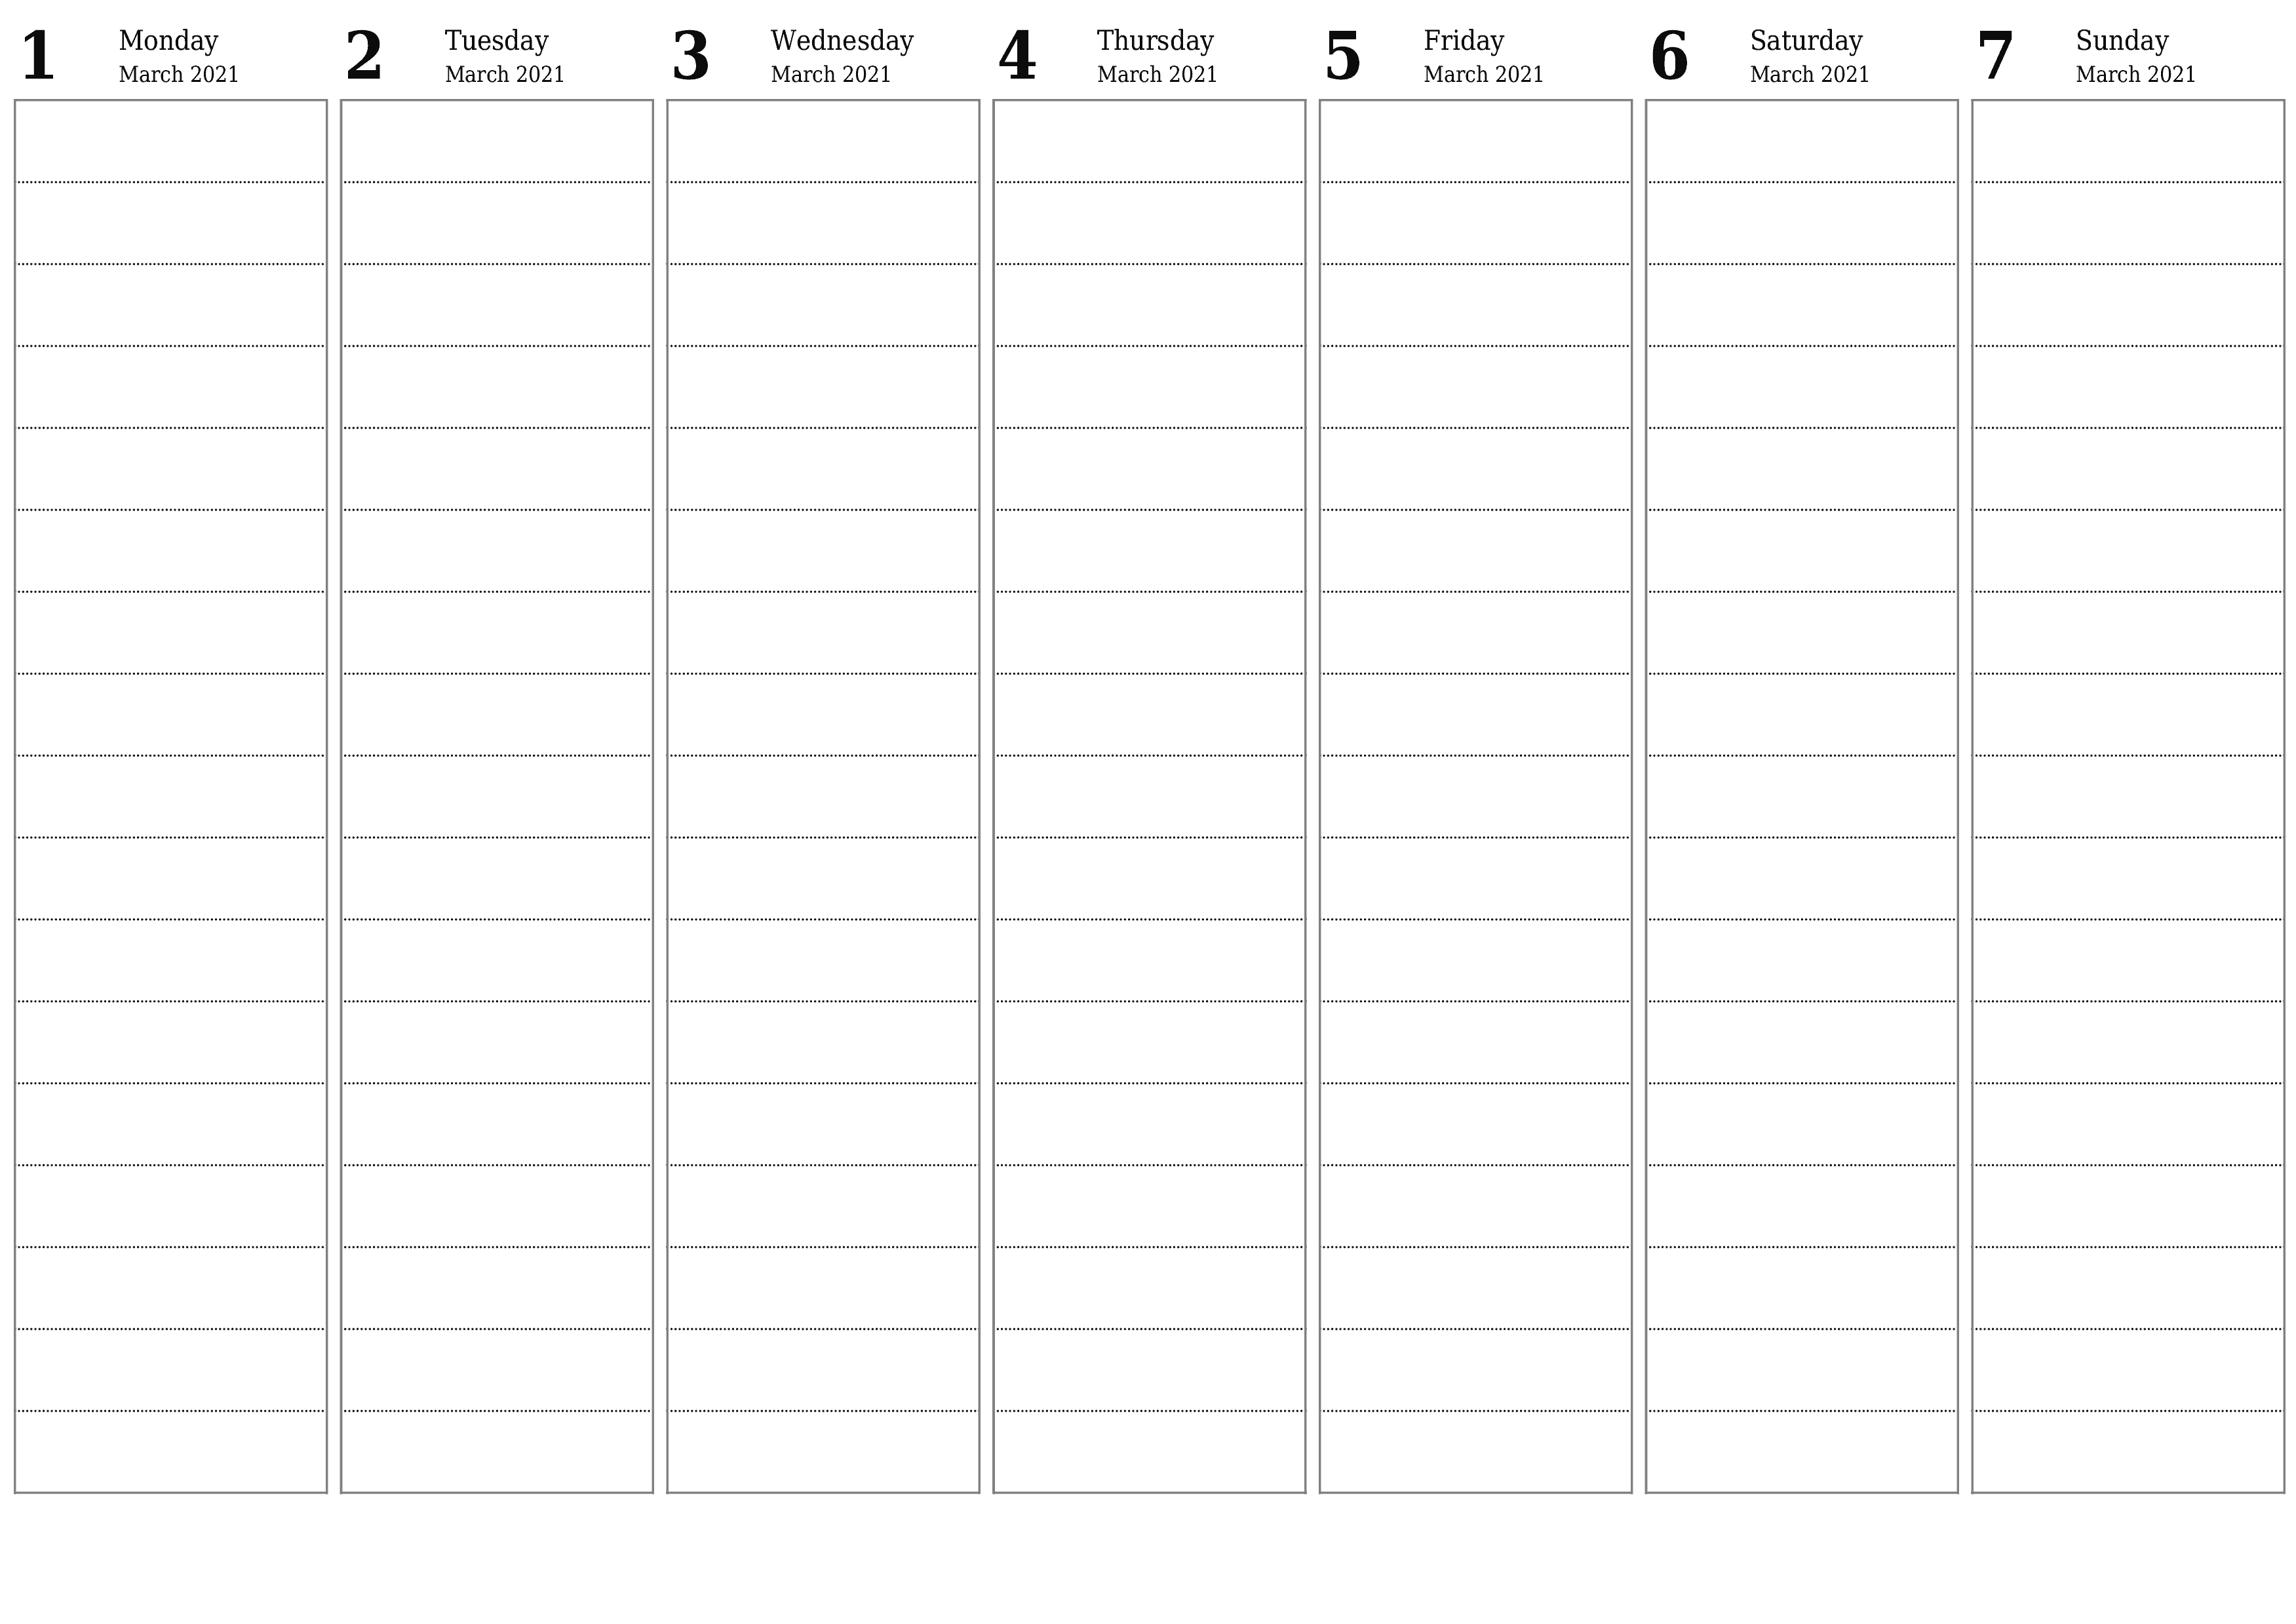 Blank weekly dated HD template image of calendar for week March 2021 save and print to PDF PNG English - 7calendar.com